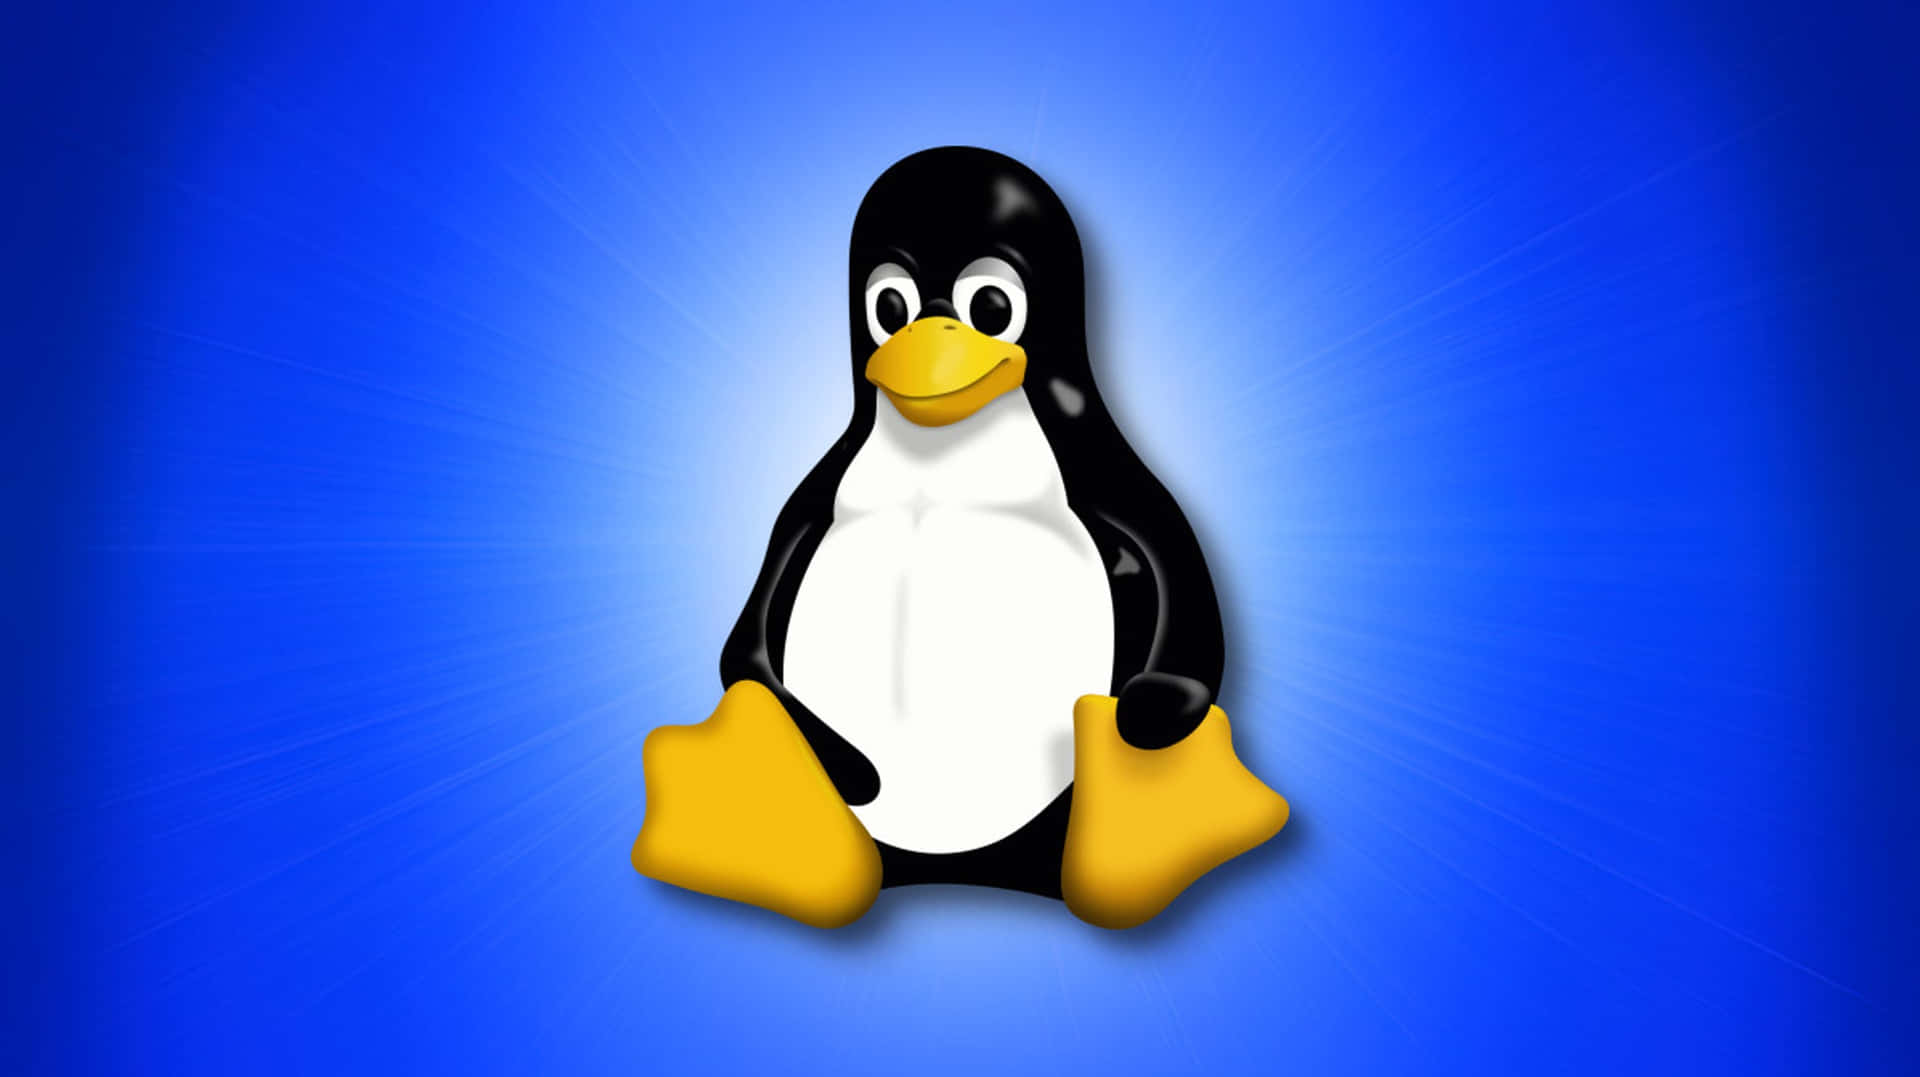 "Not Your Regular Operating System: Linux"